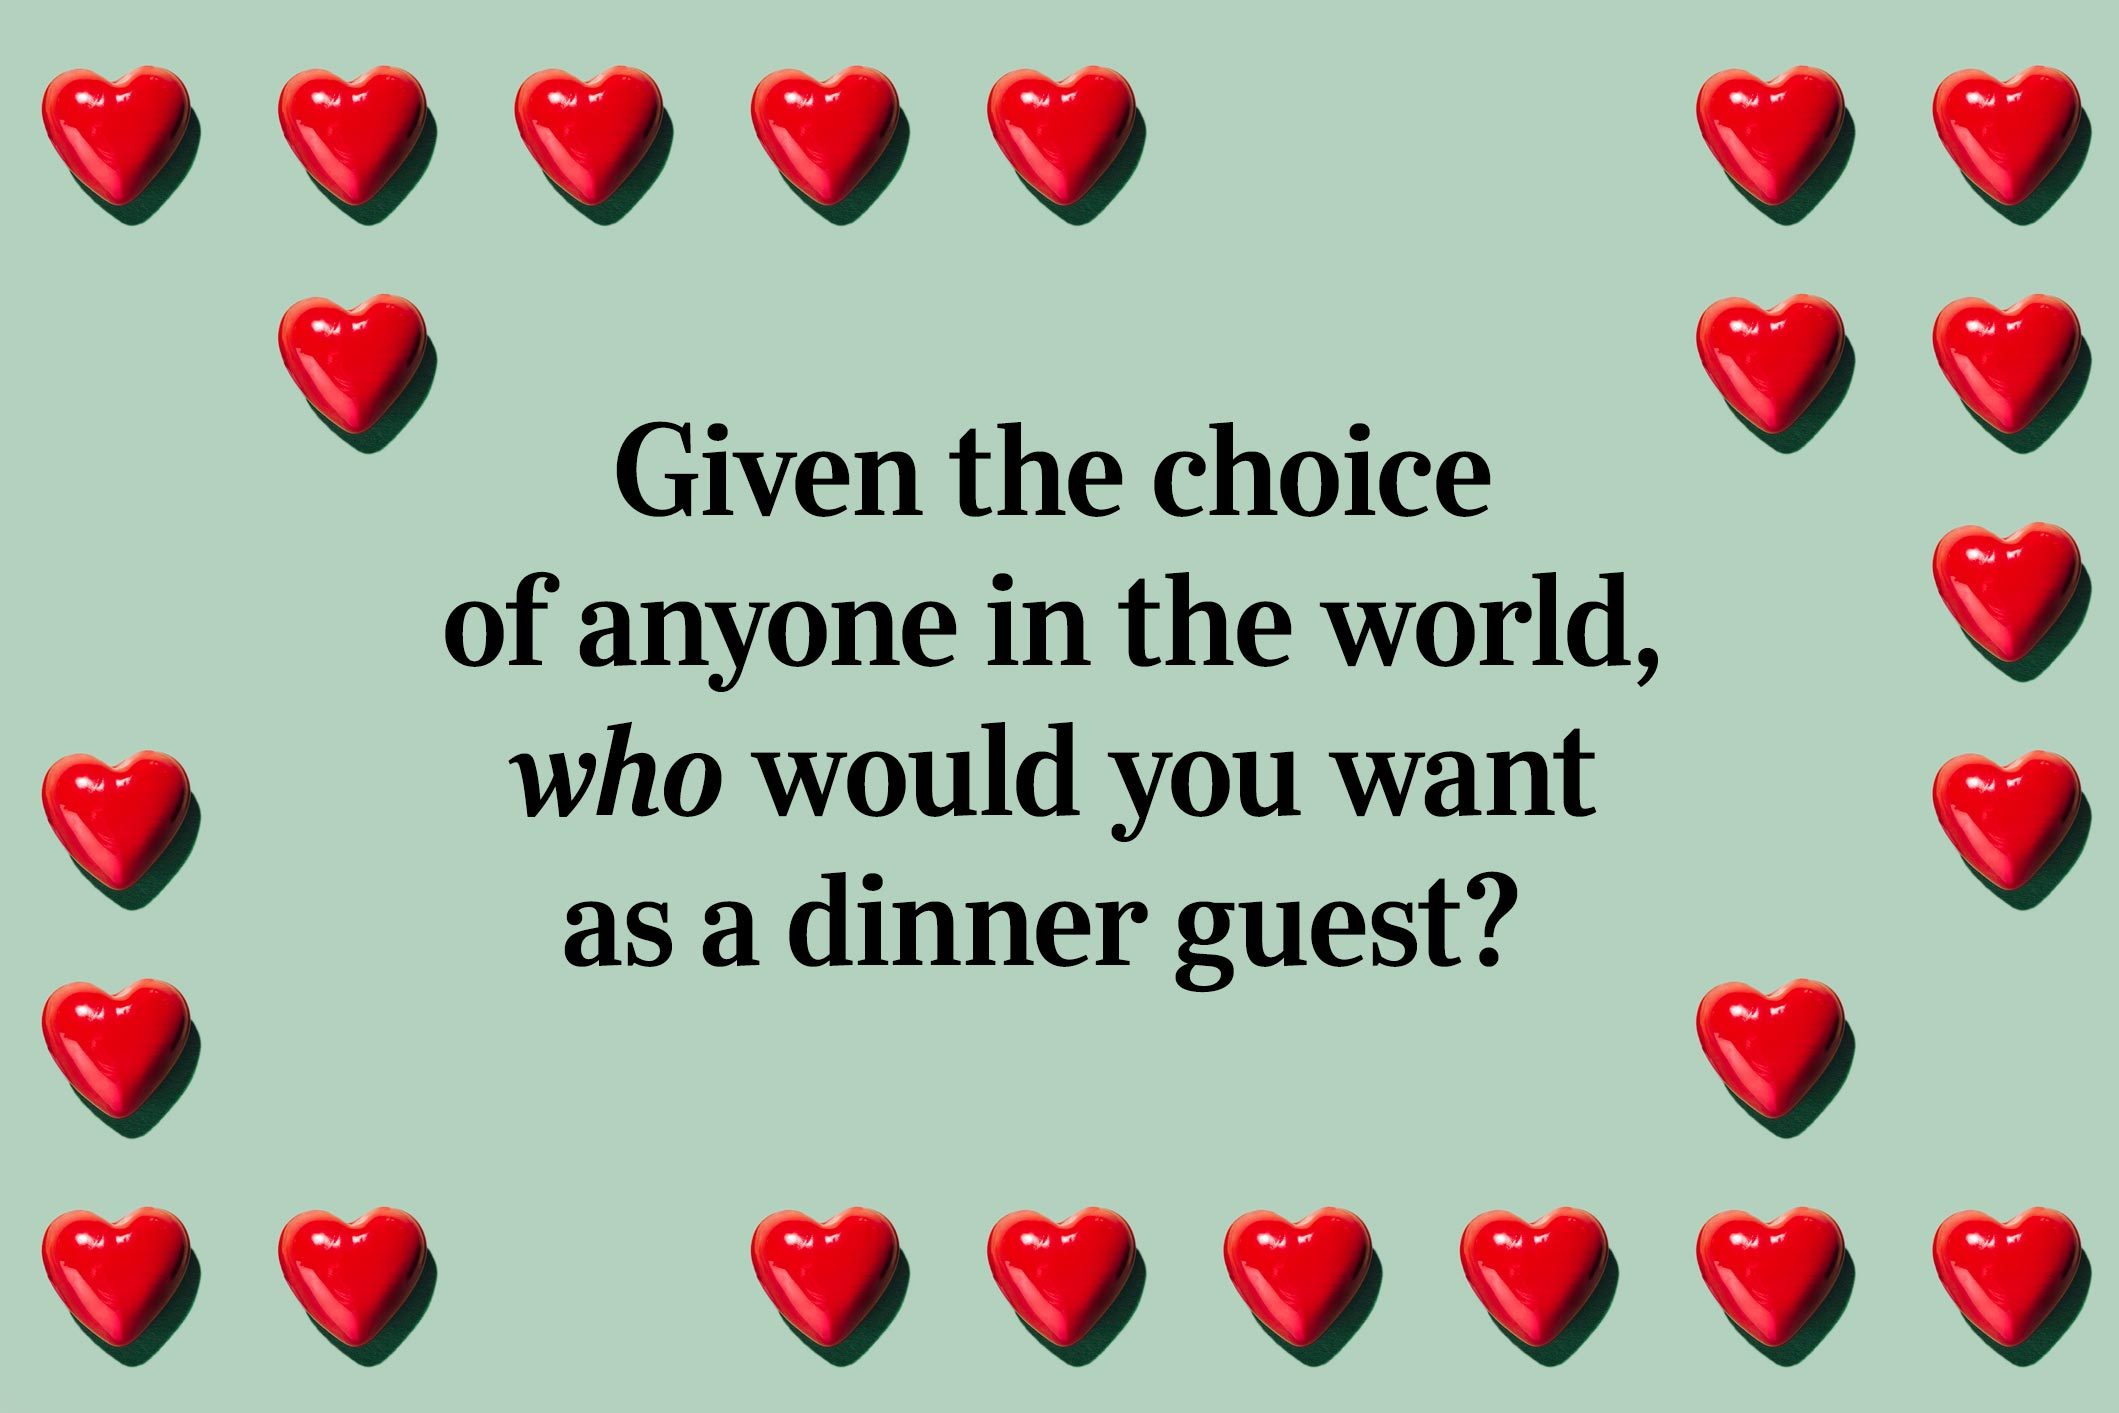 <p class="p1"><span>A fun one to start: Given the choice of anyone in the world, who would you want as a dinner guest? </span></p> <p class="p1"><span>We're sure you'd make a great <a href="https://www.rd.com/list/host-a-party/">host</a>!</span></p>